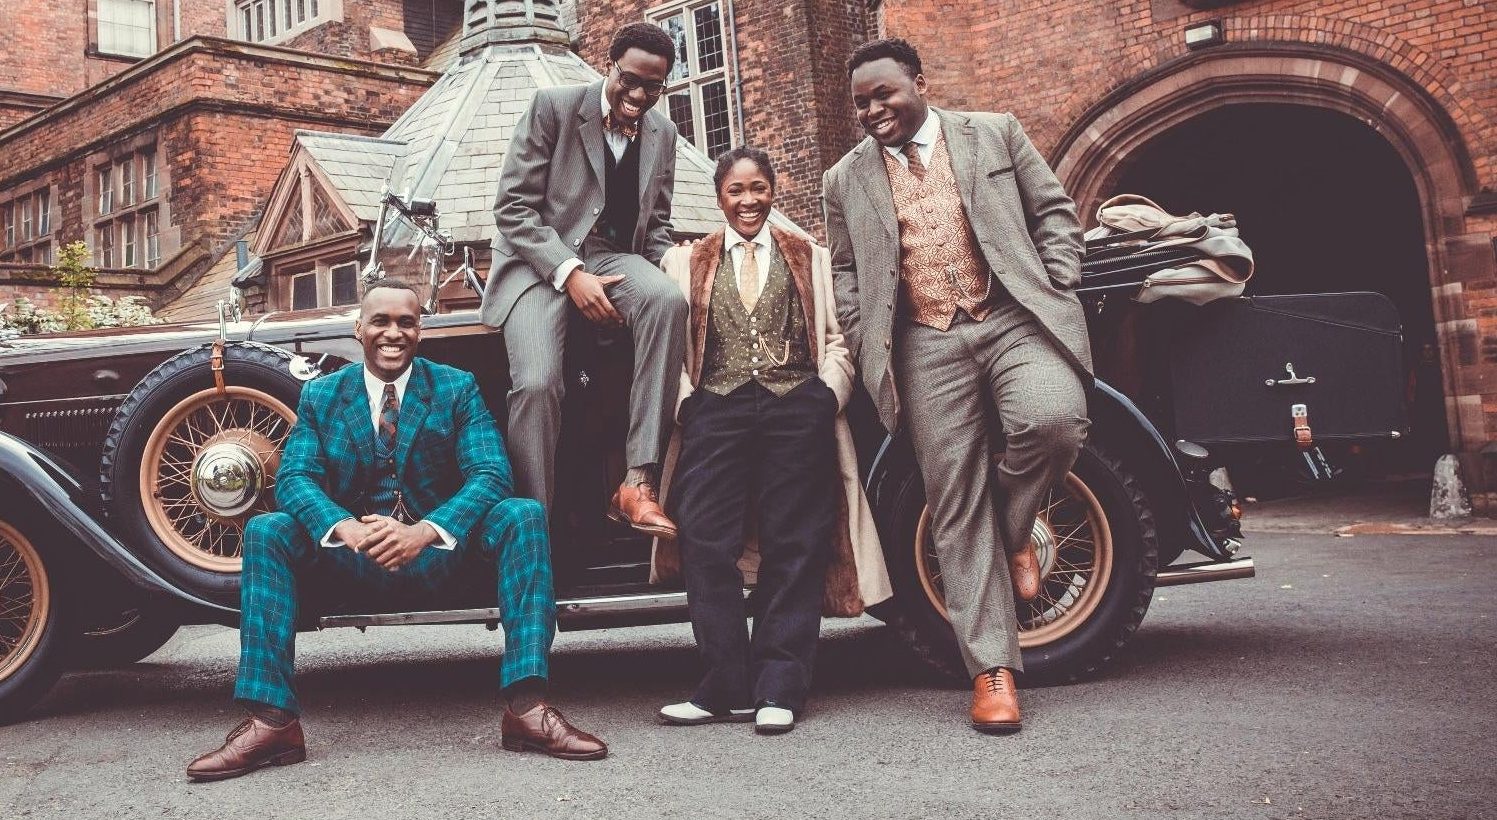 The Timewasters cast in their excellent 1920s outfits. (Image: Amazon Studios/IMDb TV)